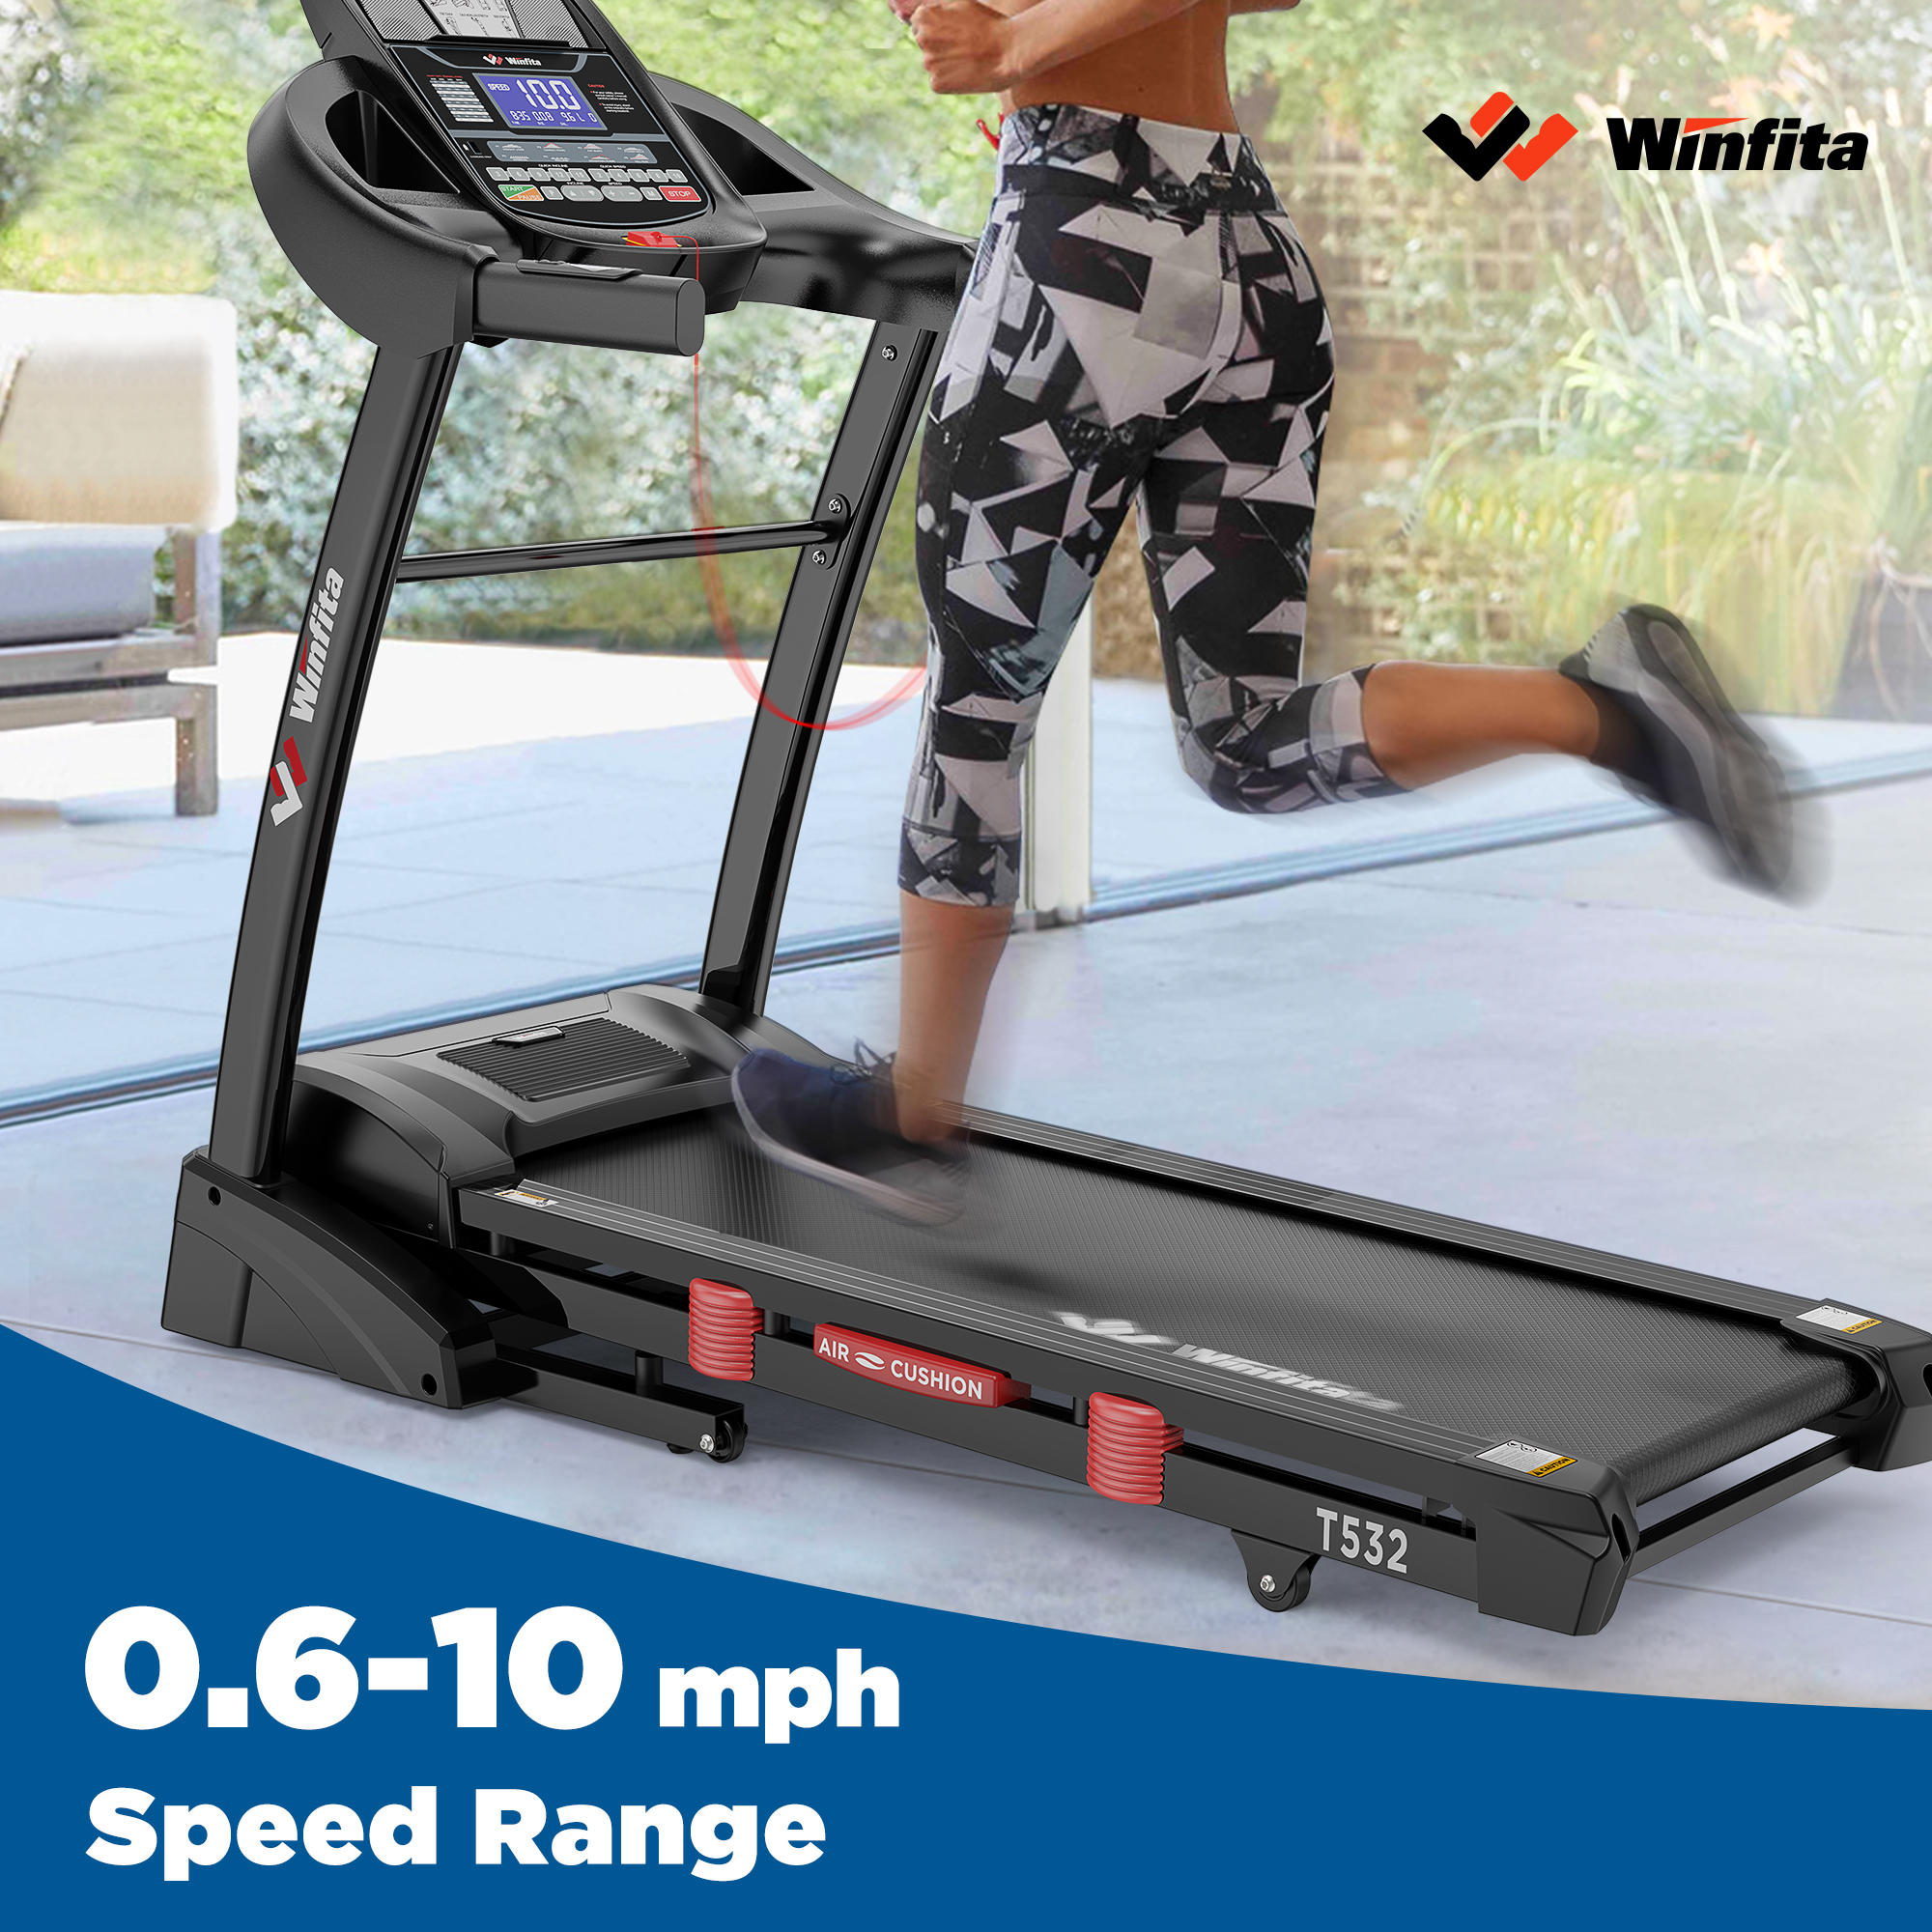 Winfita Foldable Treadmill with Auto Incline 300 lb Capacity, 0.6-10mph, Bluetooth & App, Pause Function, USB Charging Port, Tablet Holder for Home, Office - image 4 of 10